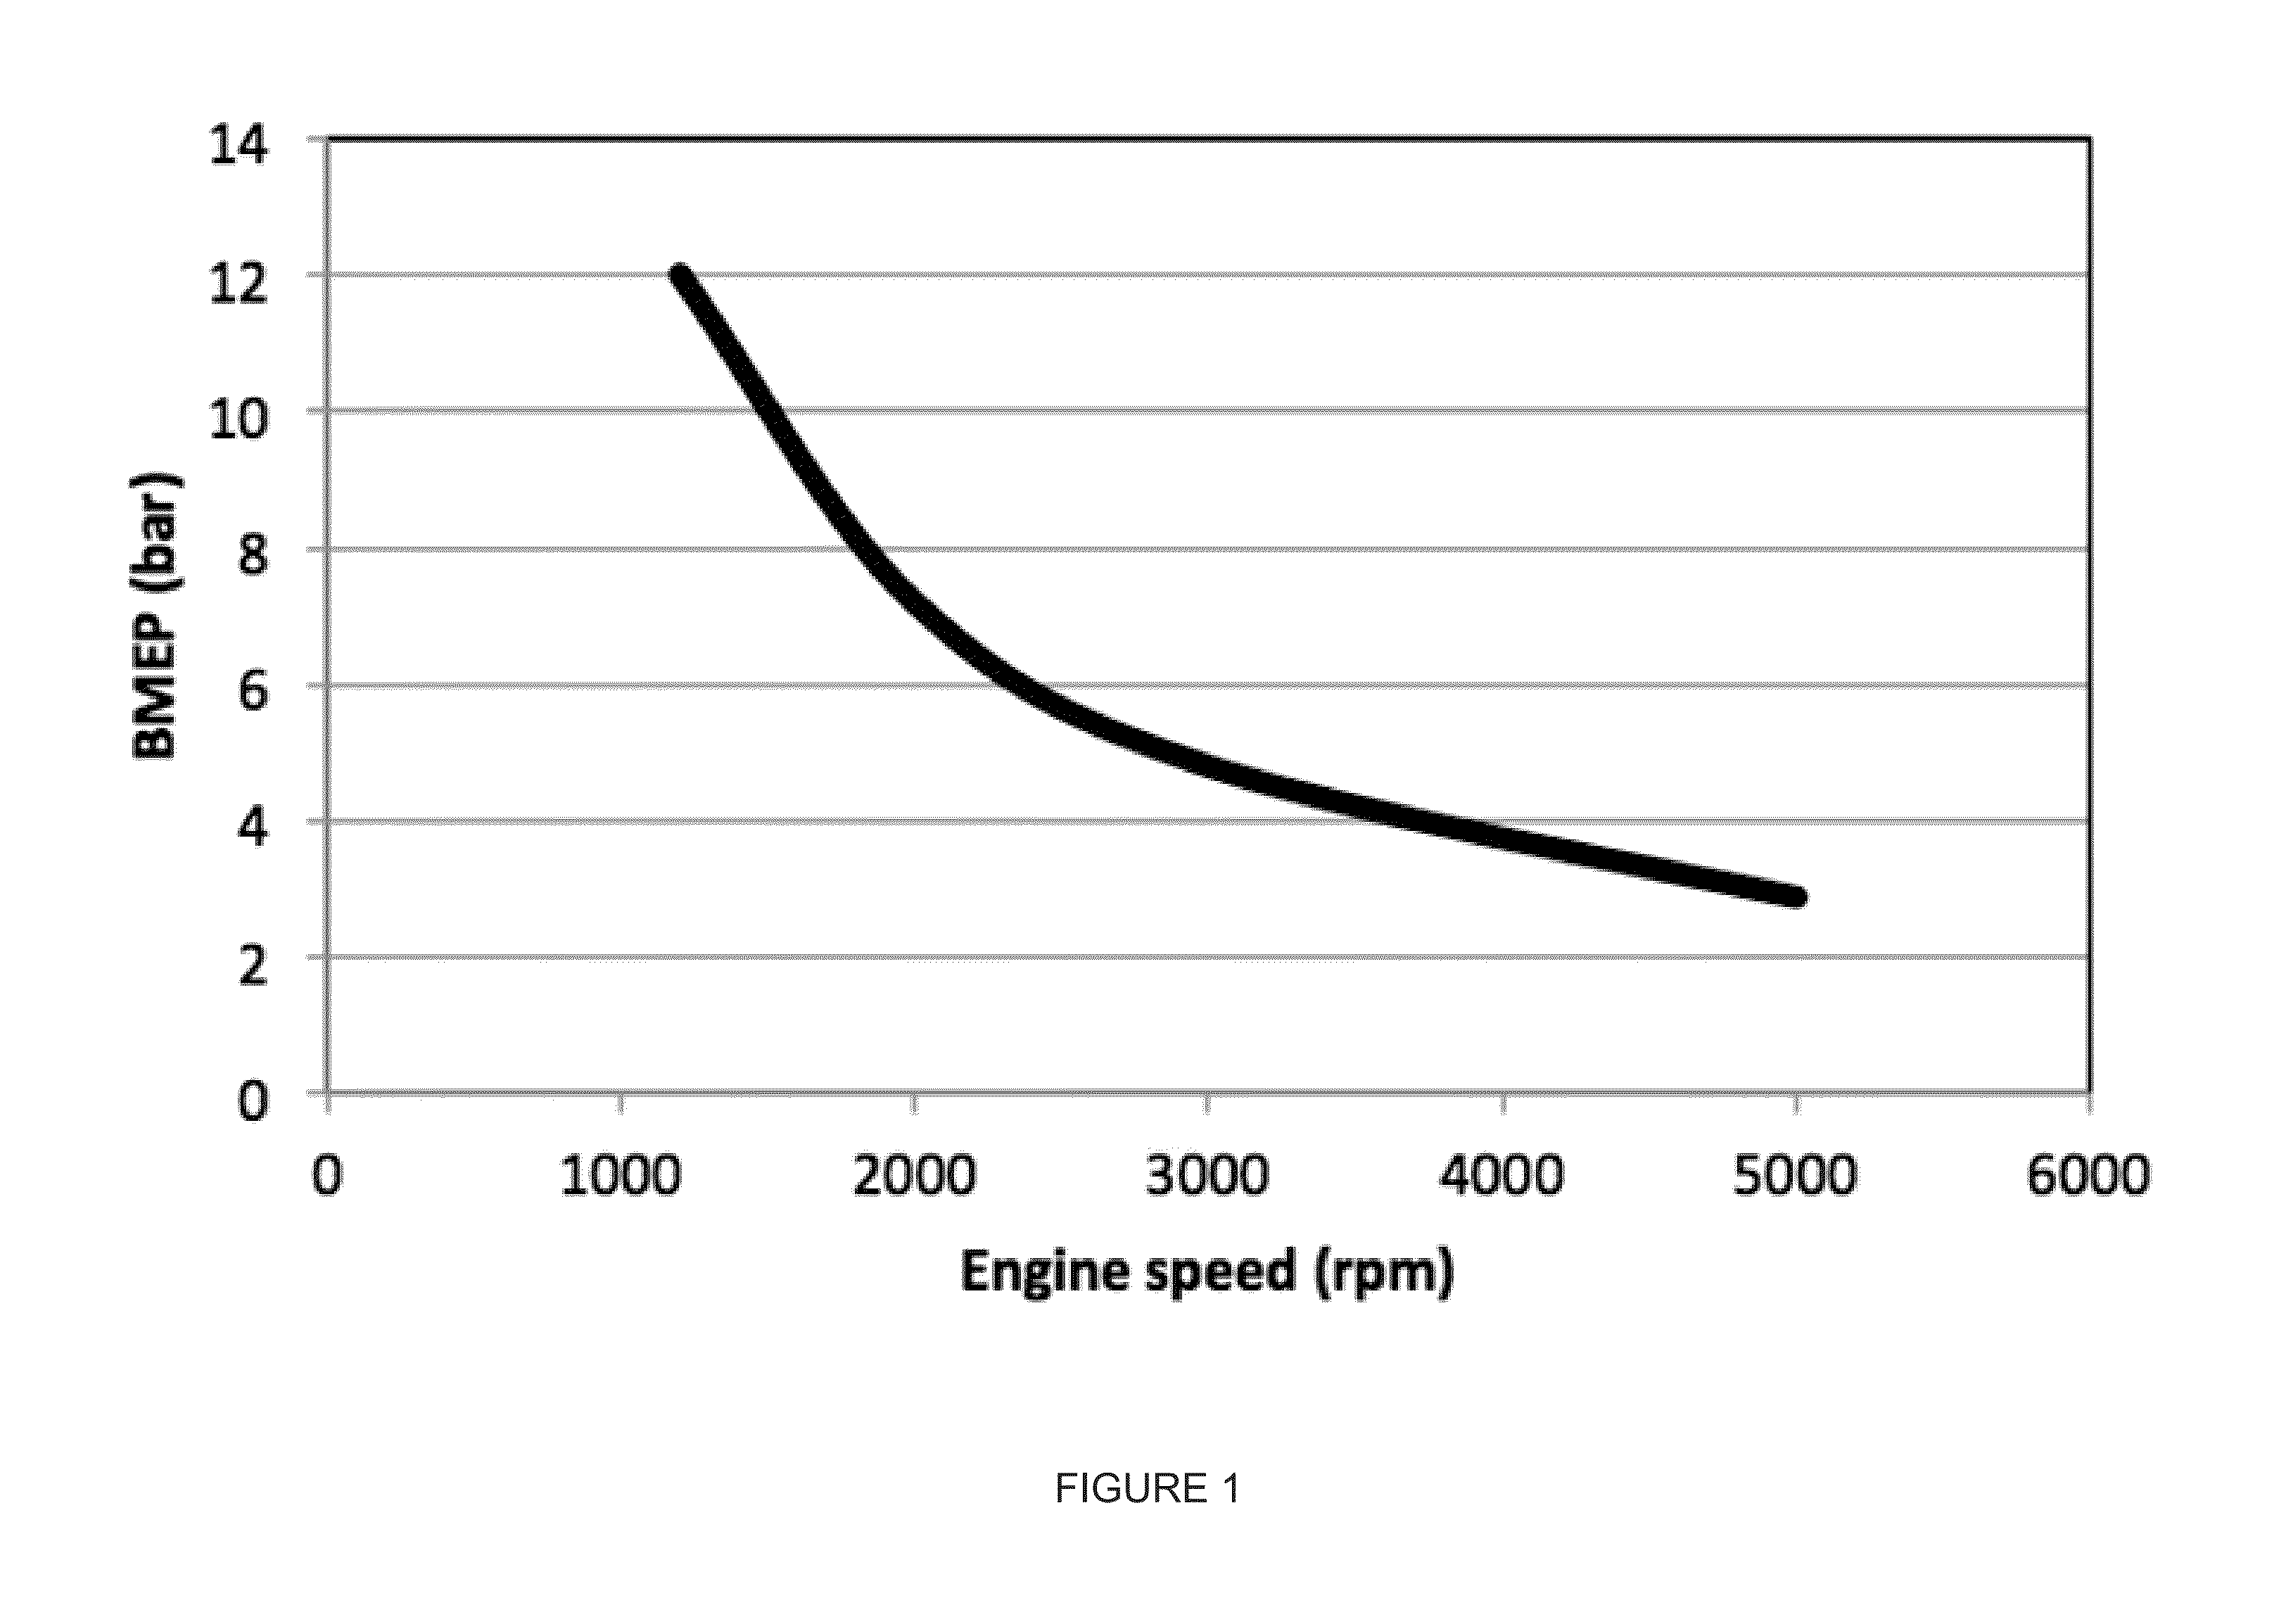 Gasoline Particulate Reduction Using Optimized Port and Direct Injection